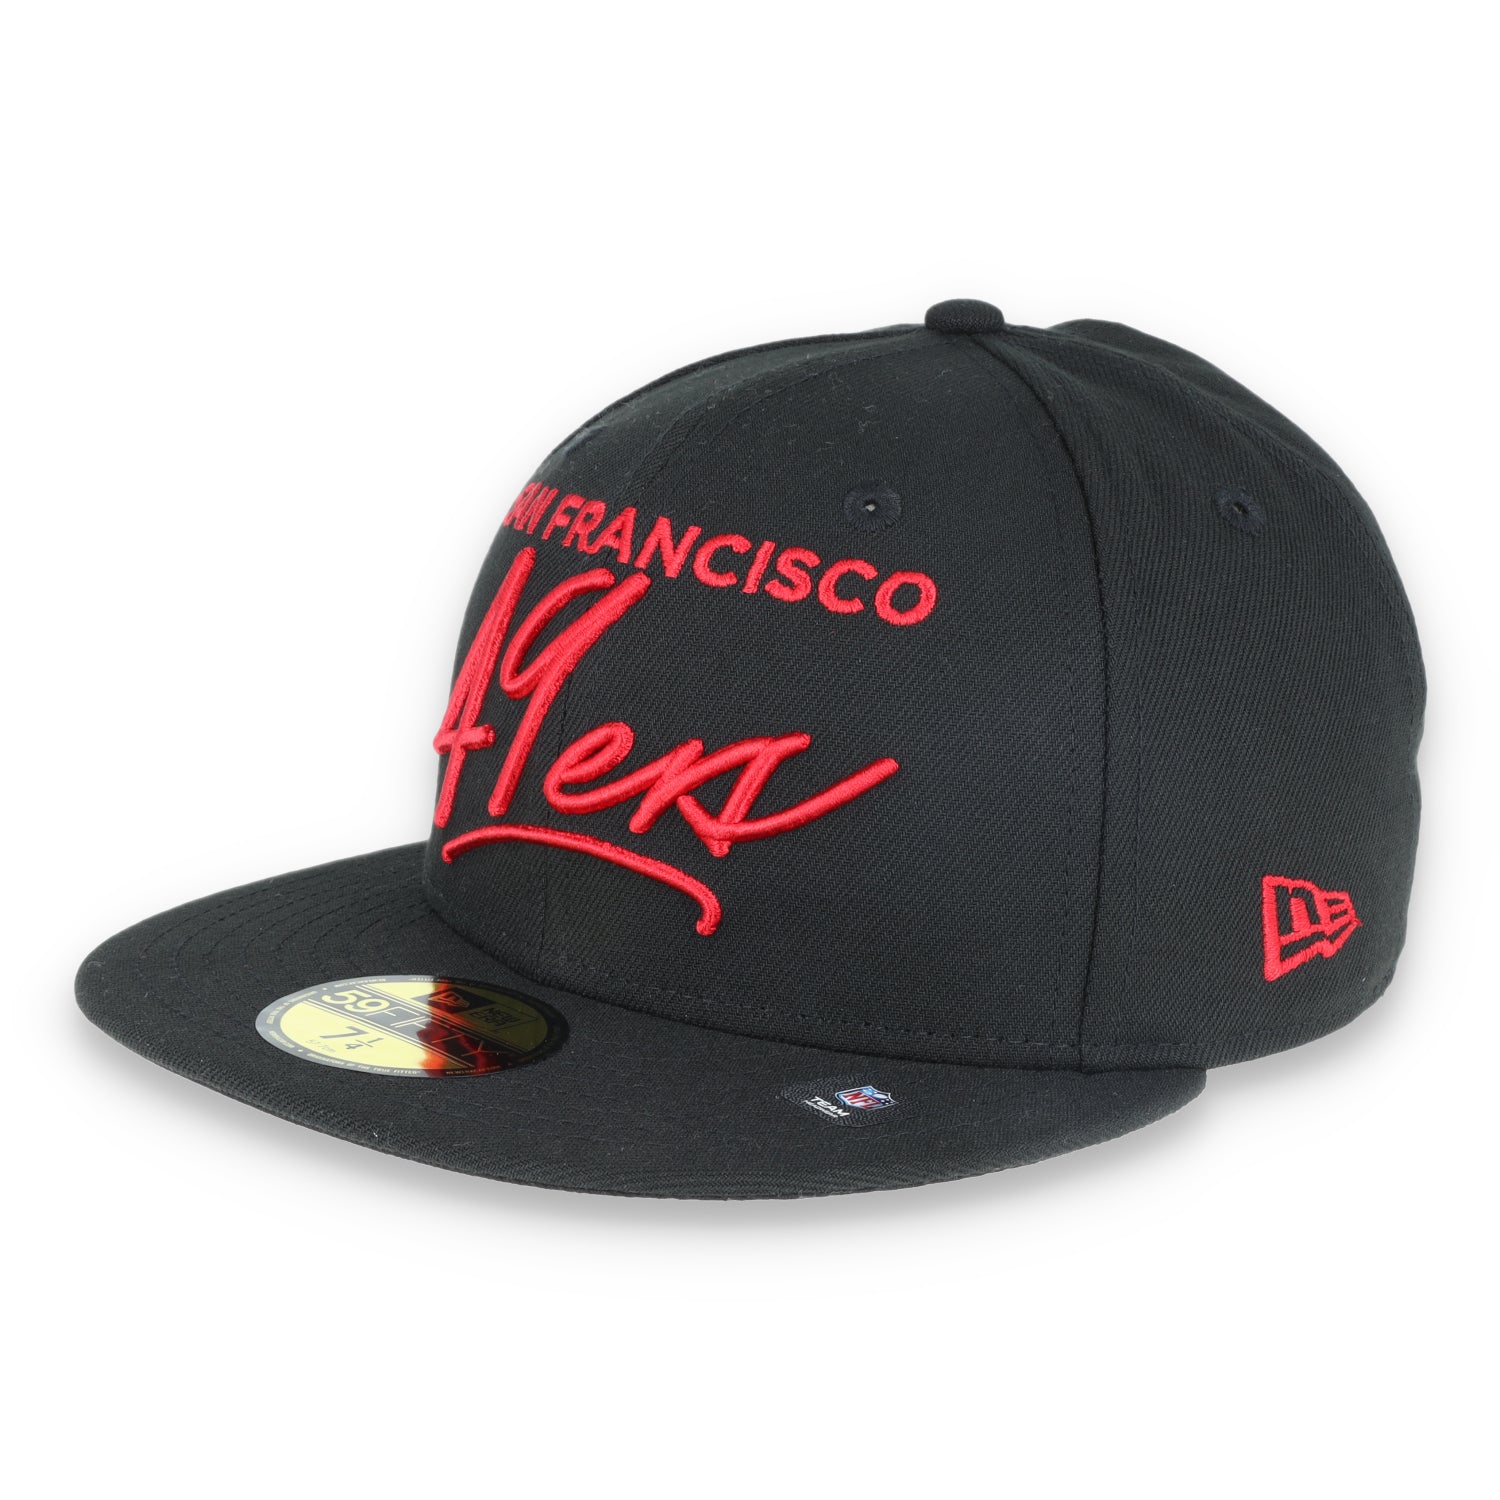 New Era SAN FRANCISCO 49ERS SCRIPTED 59FIFTY FITTED HAT-blk